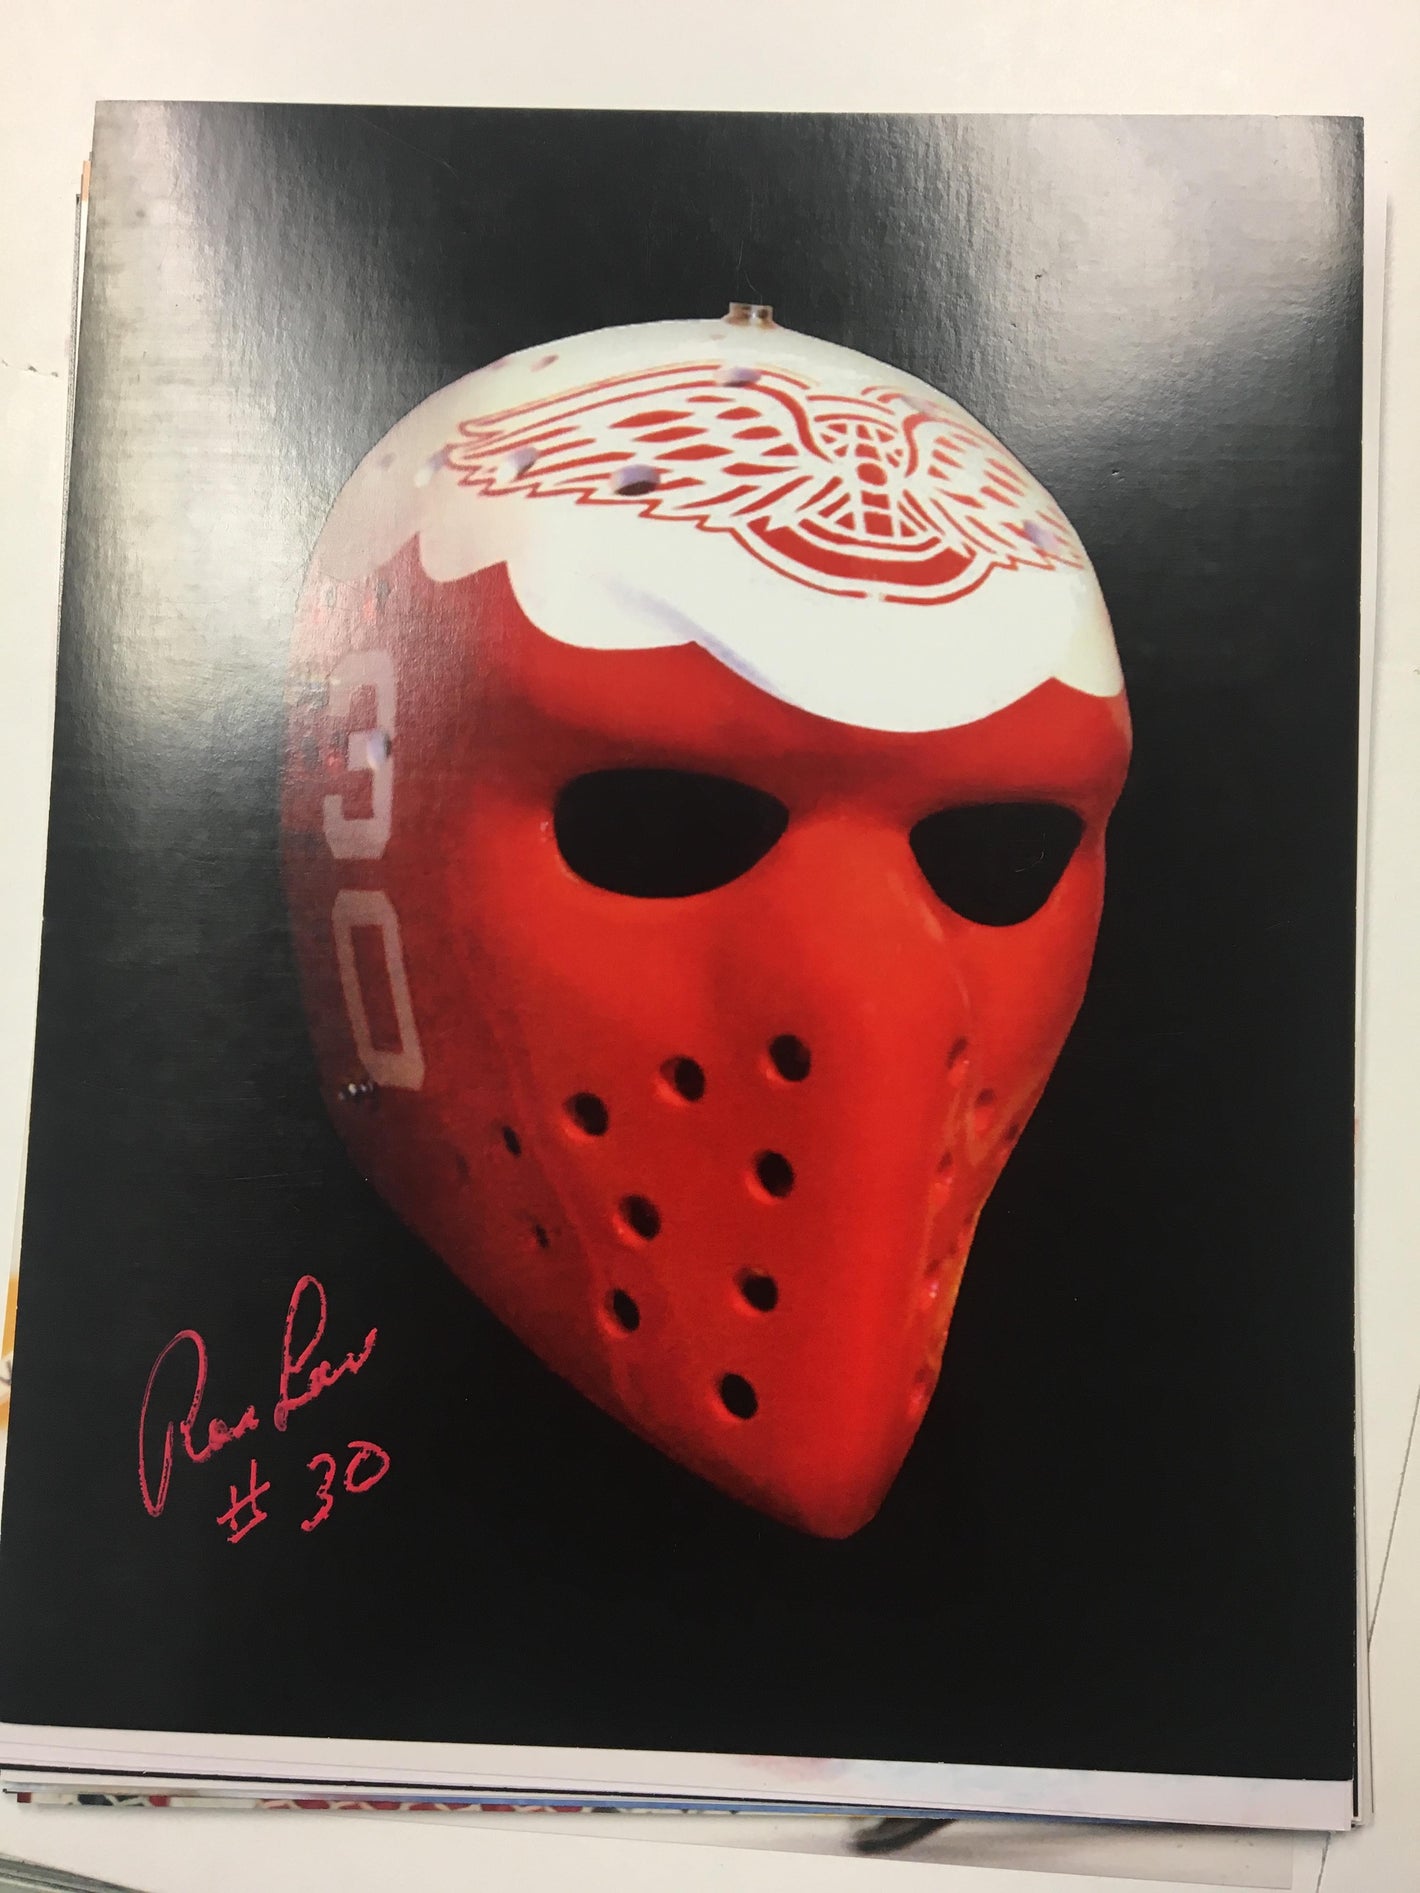 Ron Low Signed 8x10 Colour Photo - Detroit Red Wings Mask - PastPros